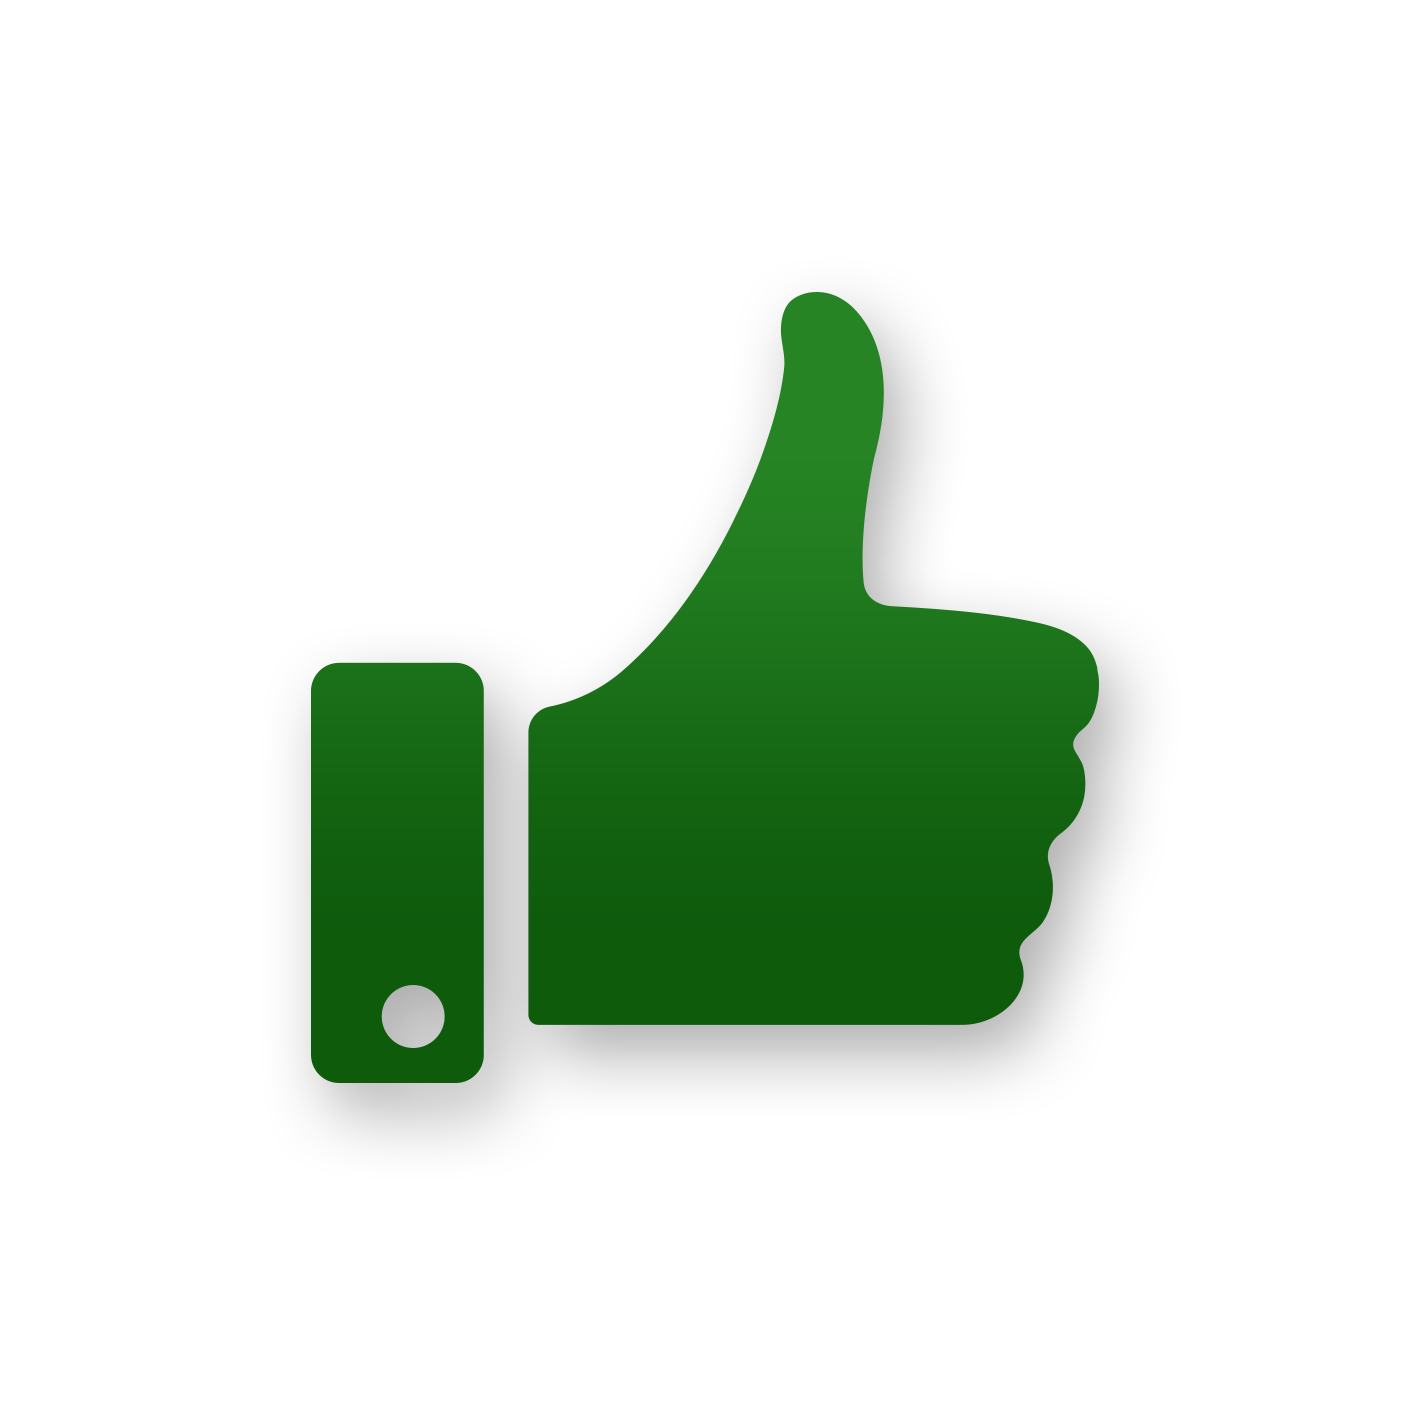 2016 thumbs up